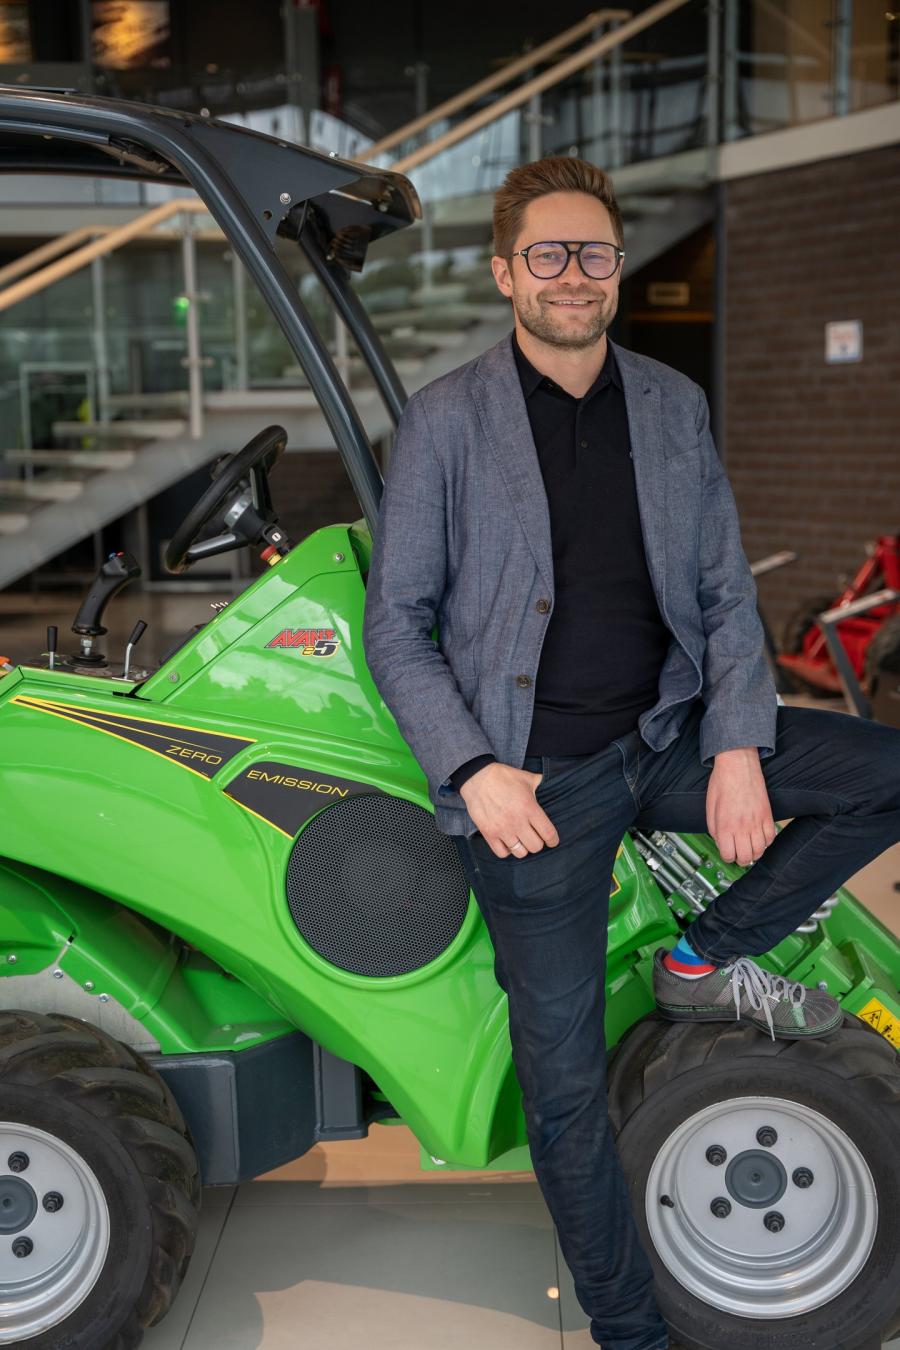 “The cooperation with Avant Power, and the batteries they have developed, allow us to build the kind of electric loaders that the market has been longing for. Longer working time and more affordable pricing have been key issues with electric loaders until now. With the new e5 models, we intend to tackle them both,” said Jani Käkelä, CEO of Avant Tecno.